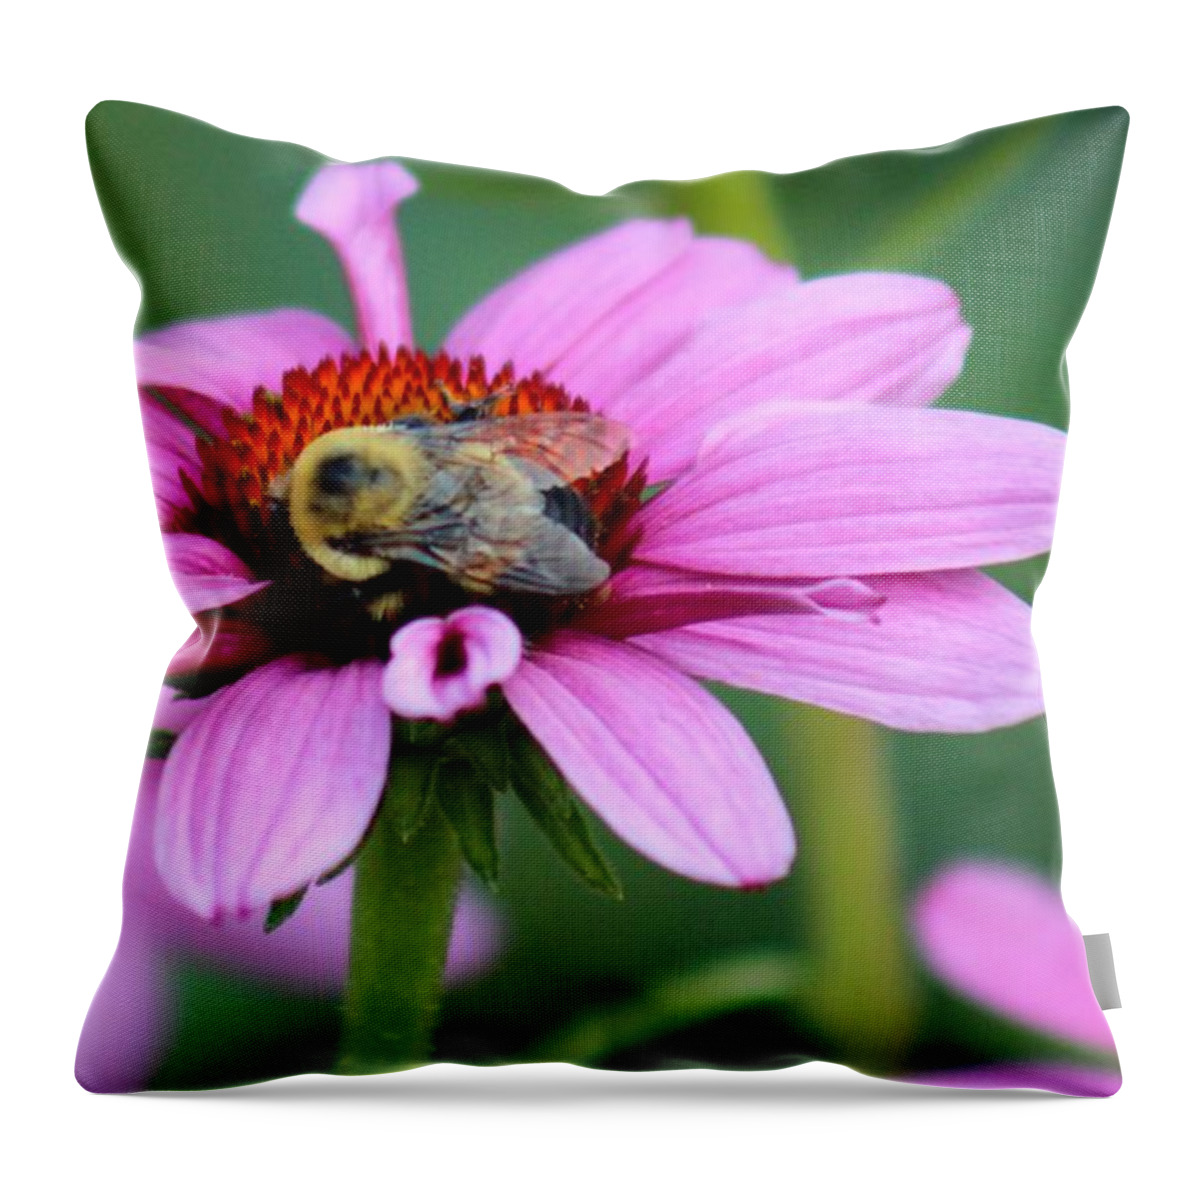 Pink Throw Pillow featuring the photograph Nature's Beauty 70 by Deena Withycombe